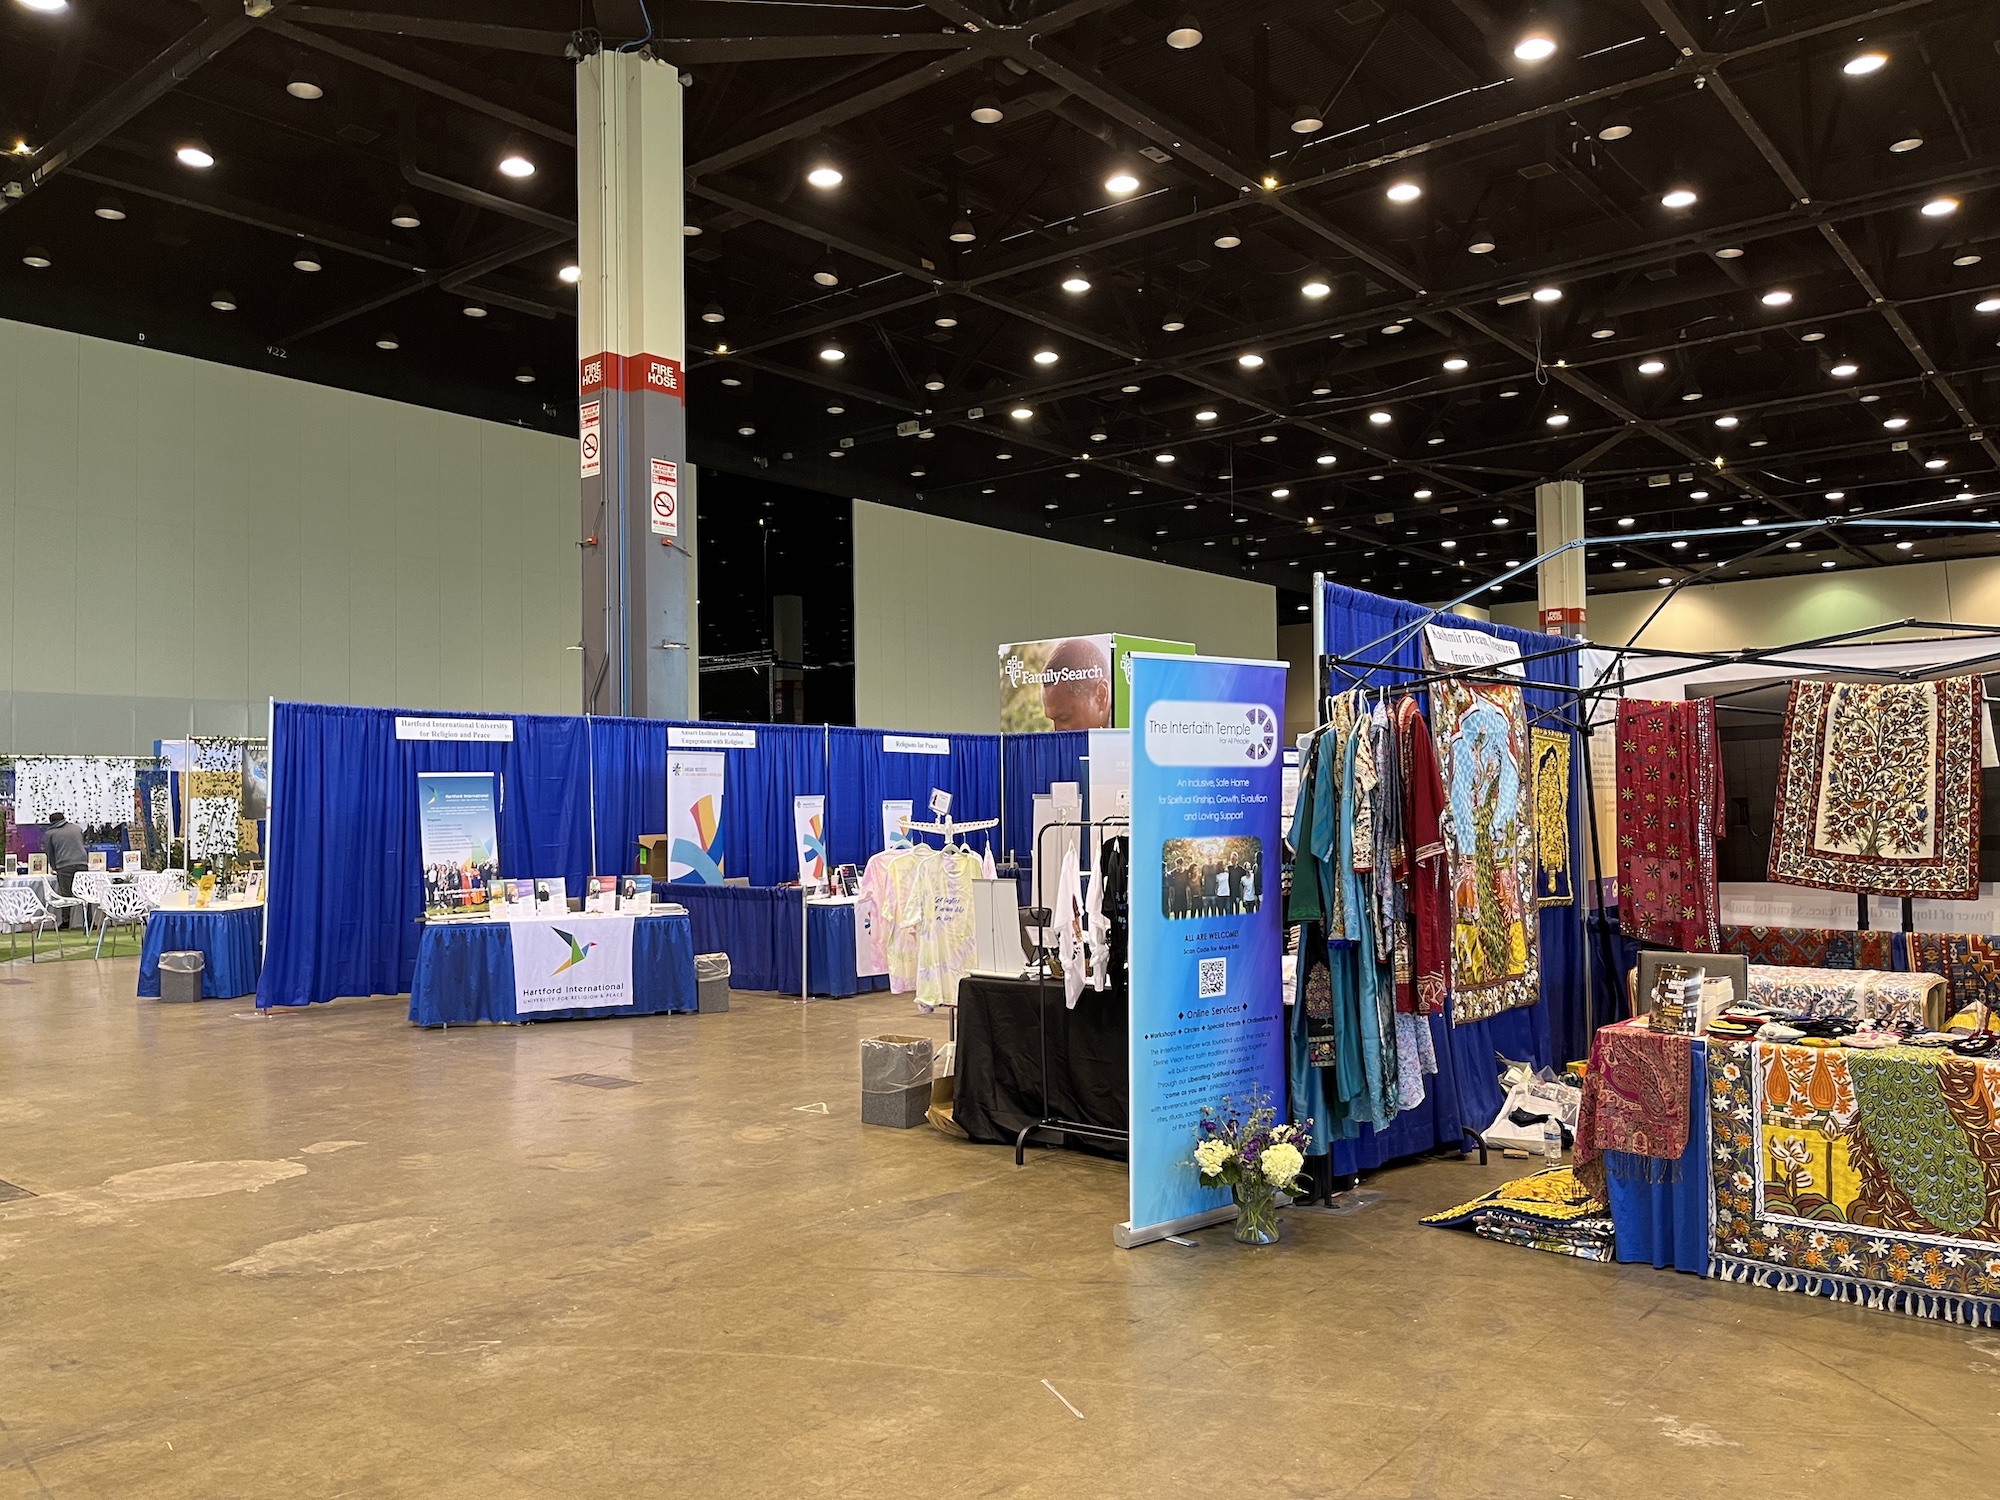 Booth in exhibit hall